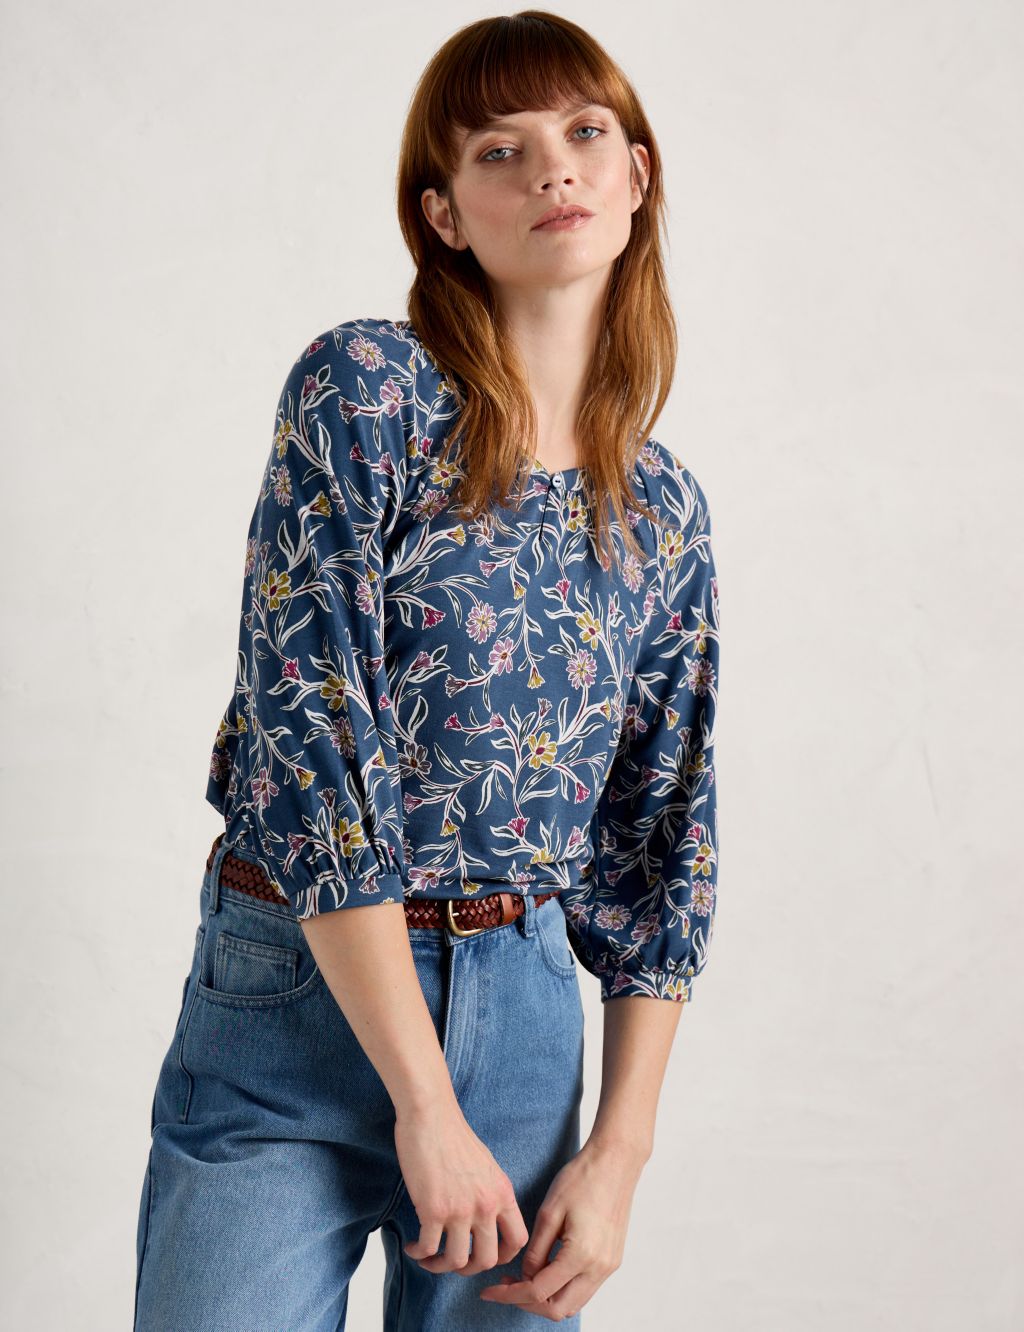 Floral Top With Cotton image 3